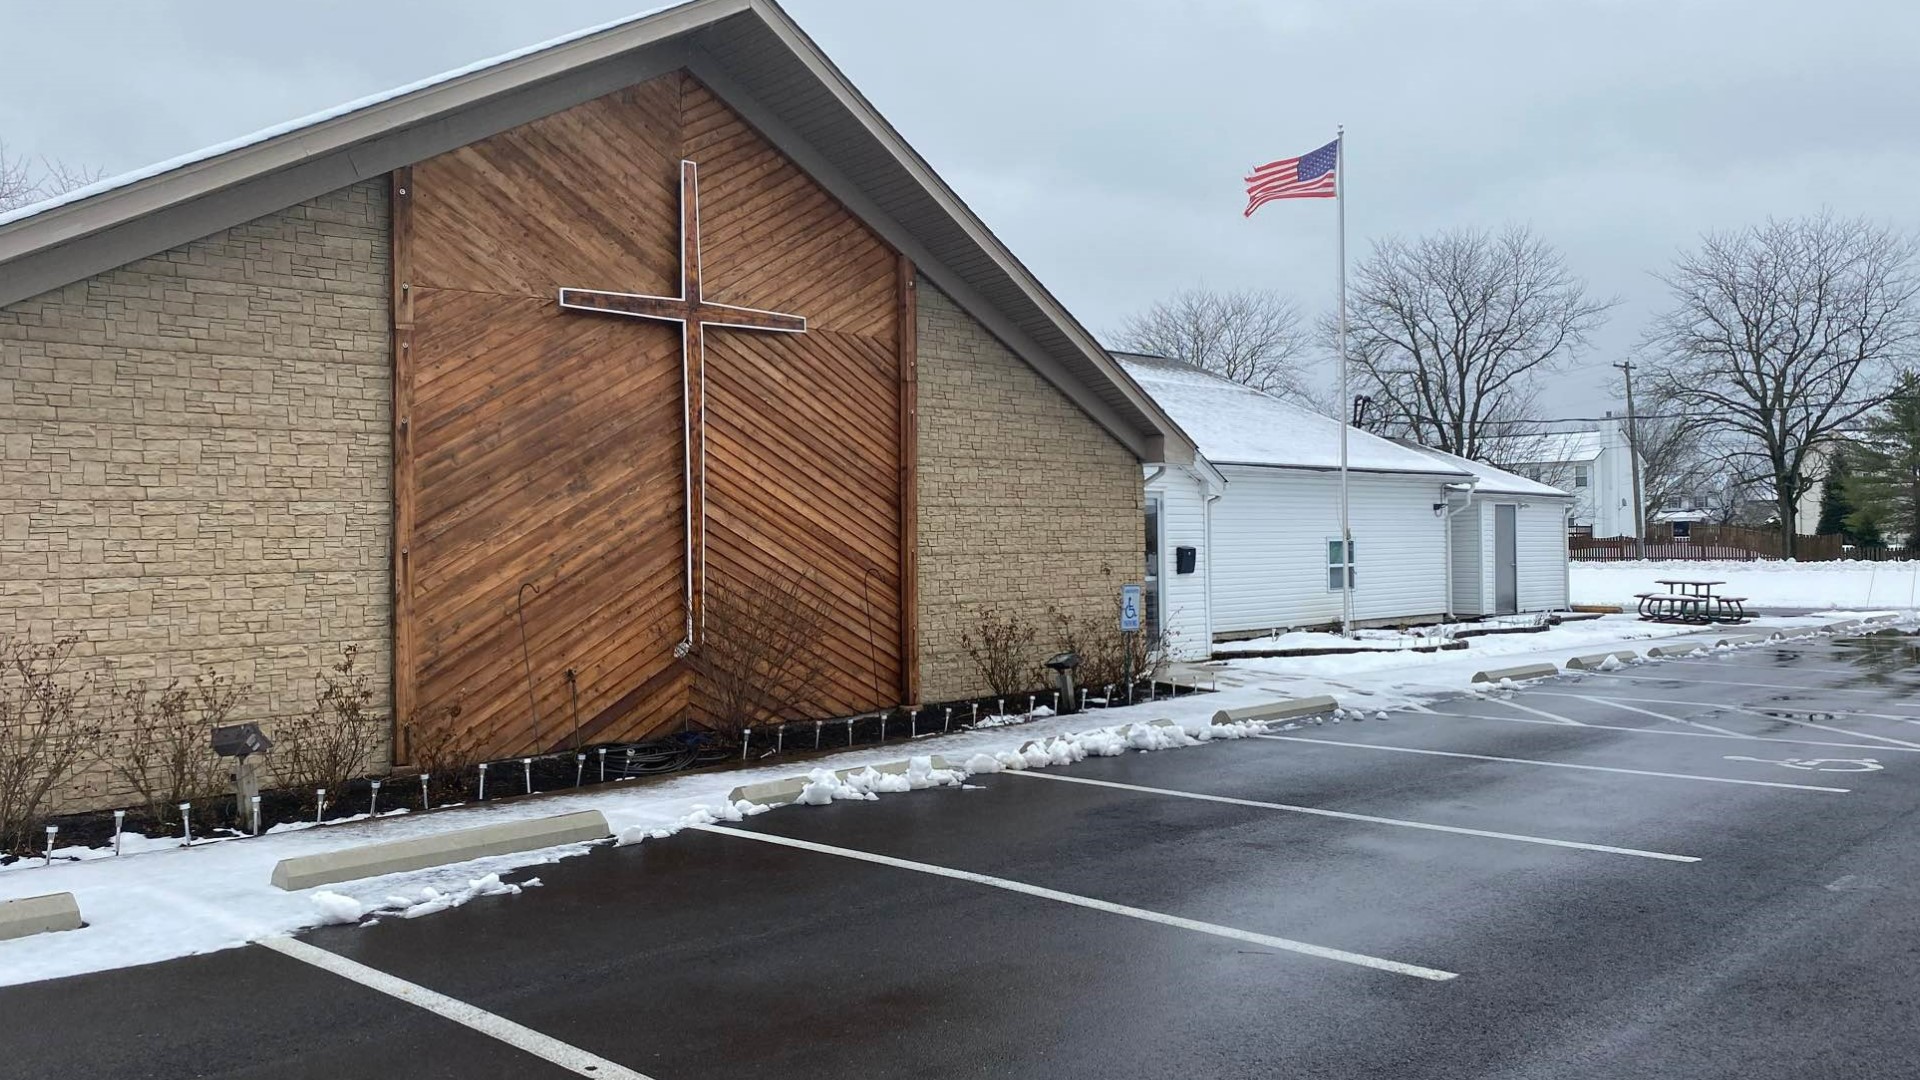 Police say the incidents happened at the Open Gate Church of God from 2012 to 2014.